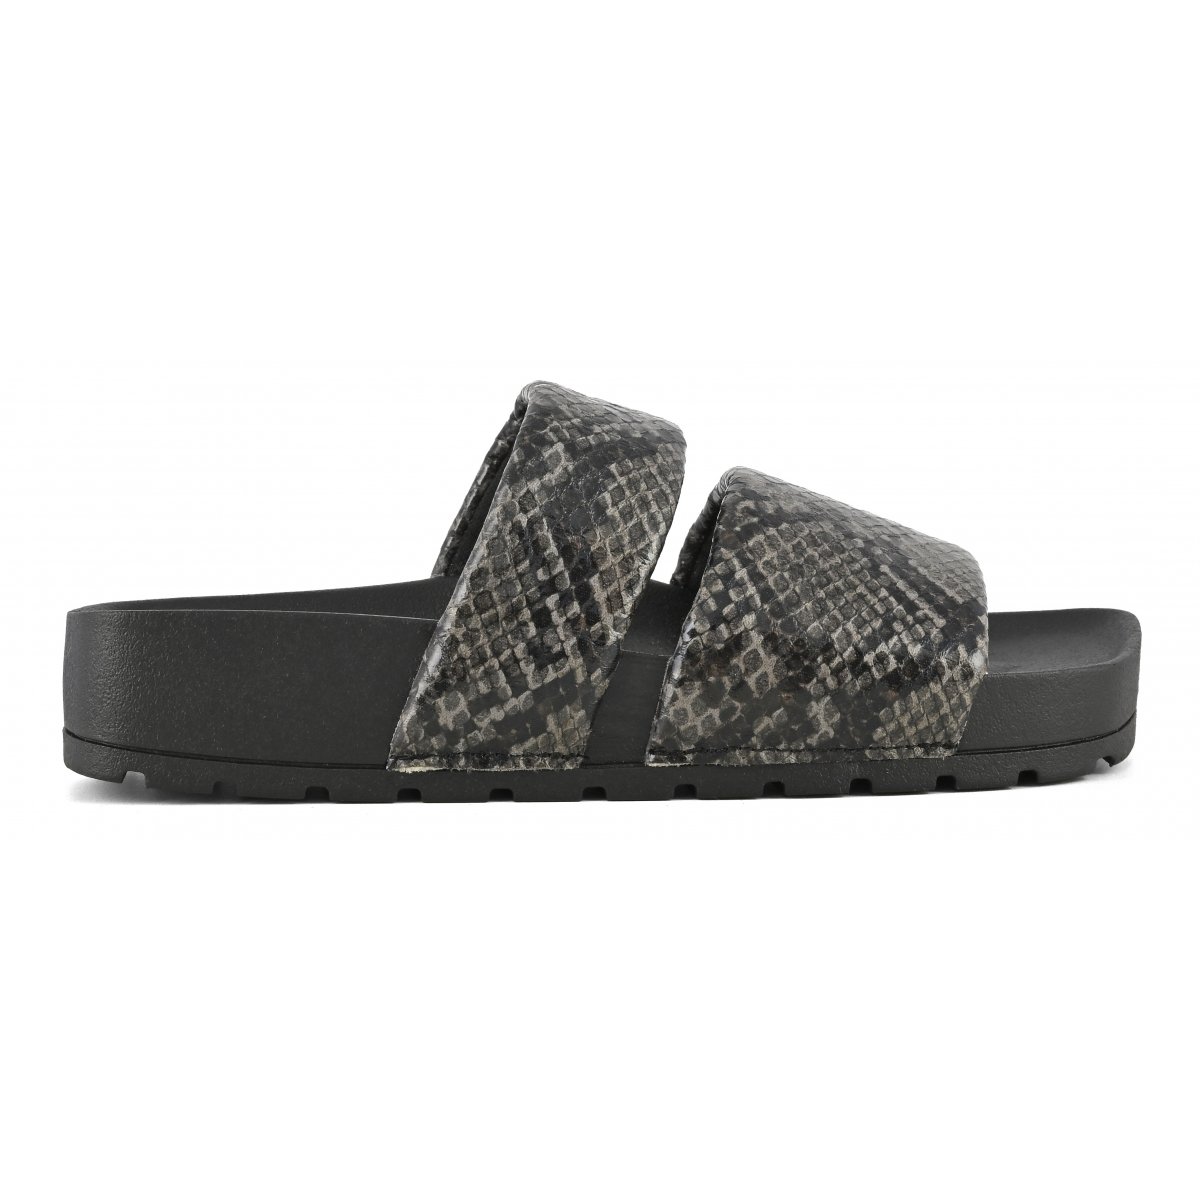 Animalier square-toe two-band slide